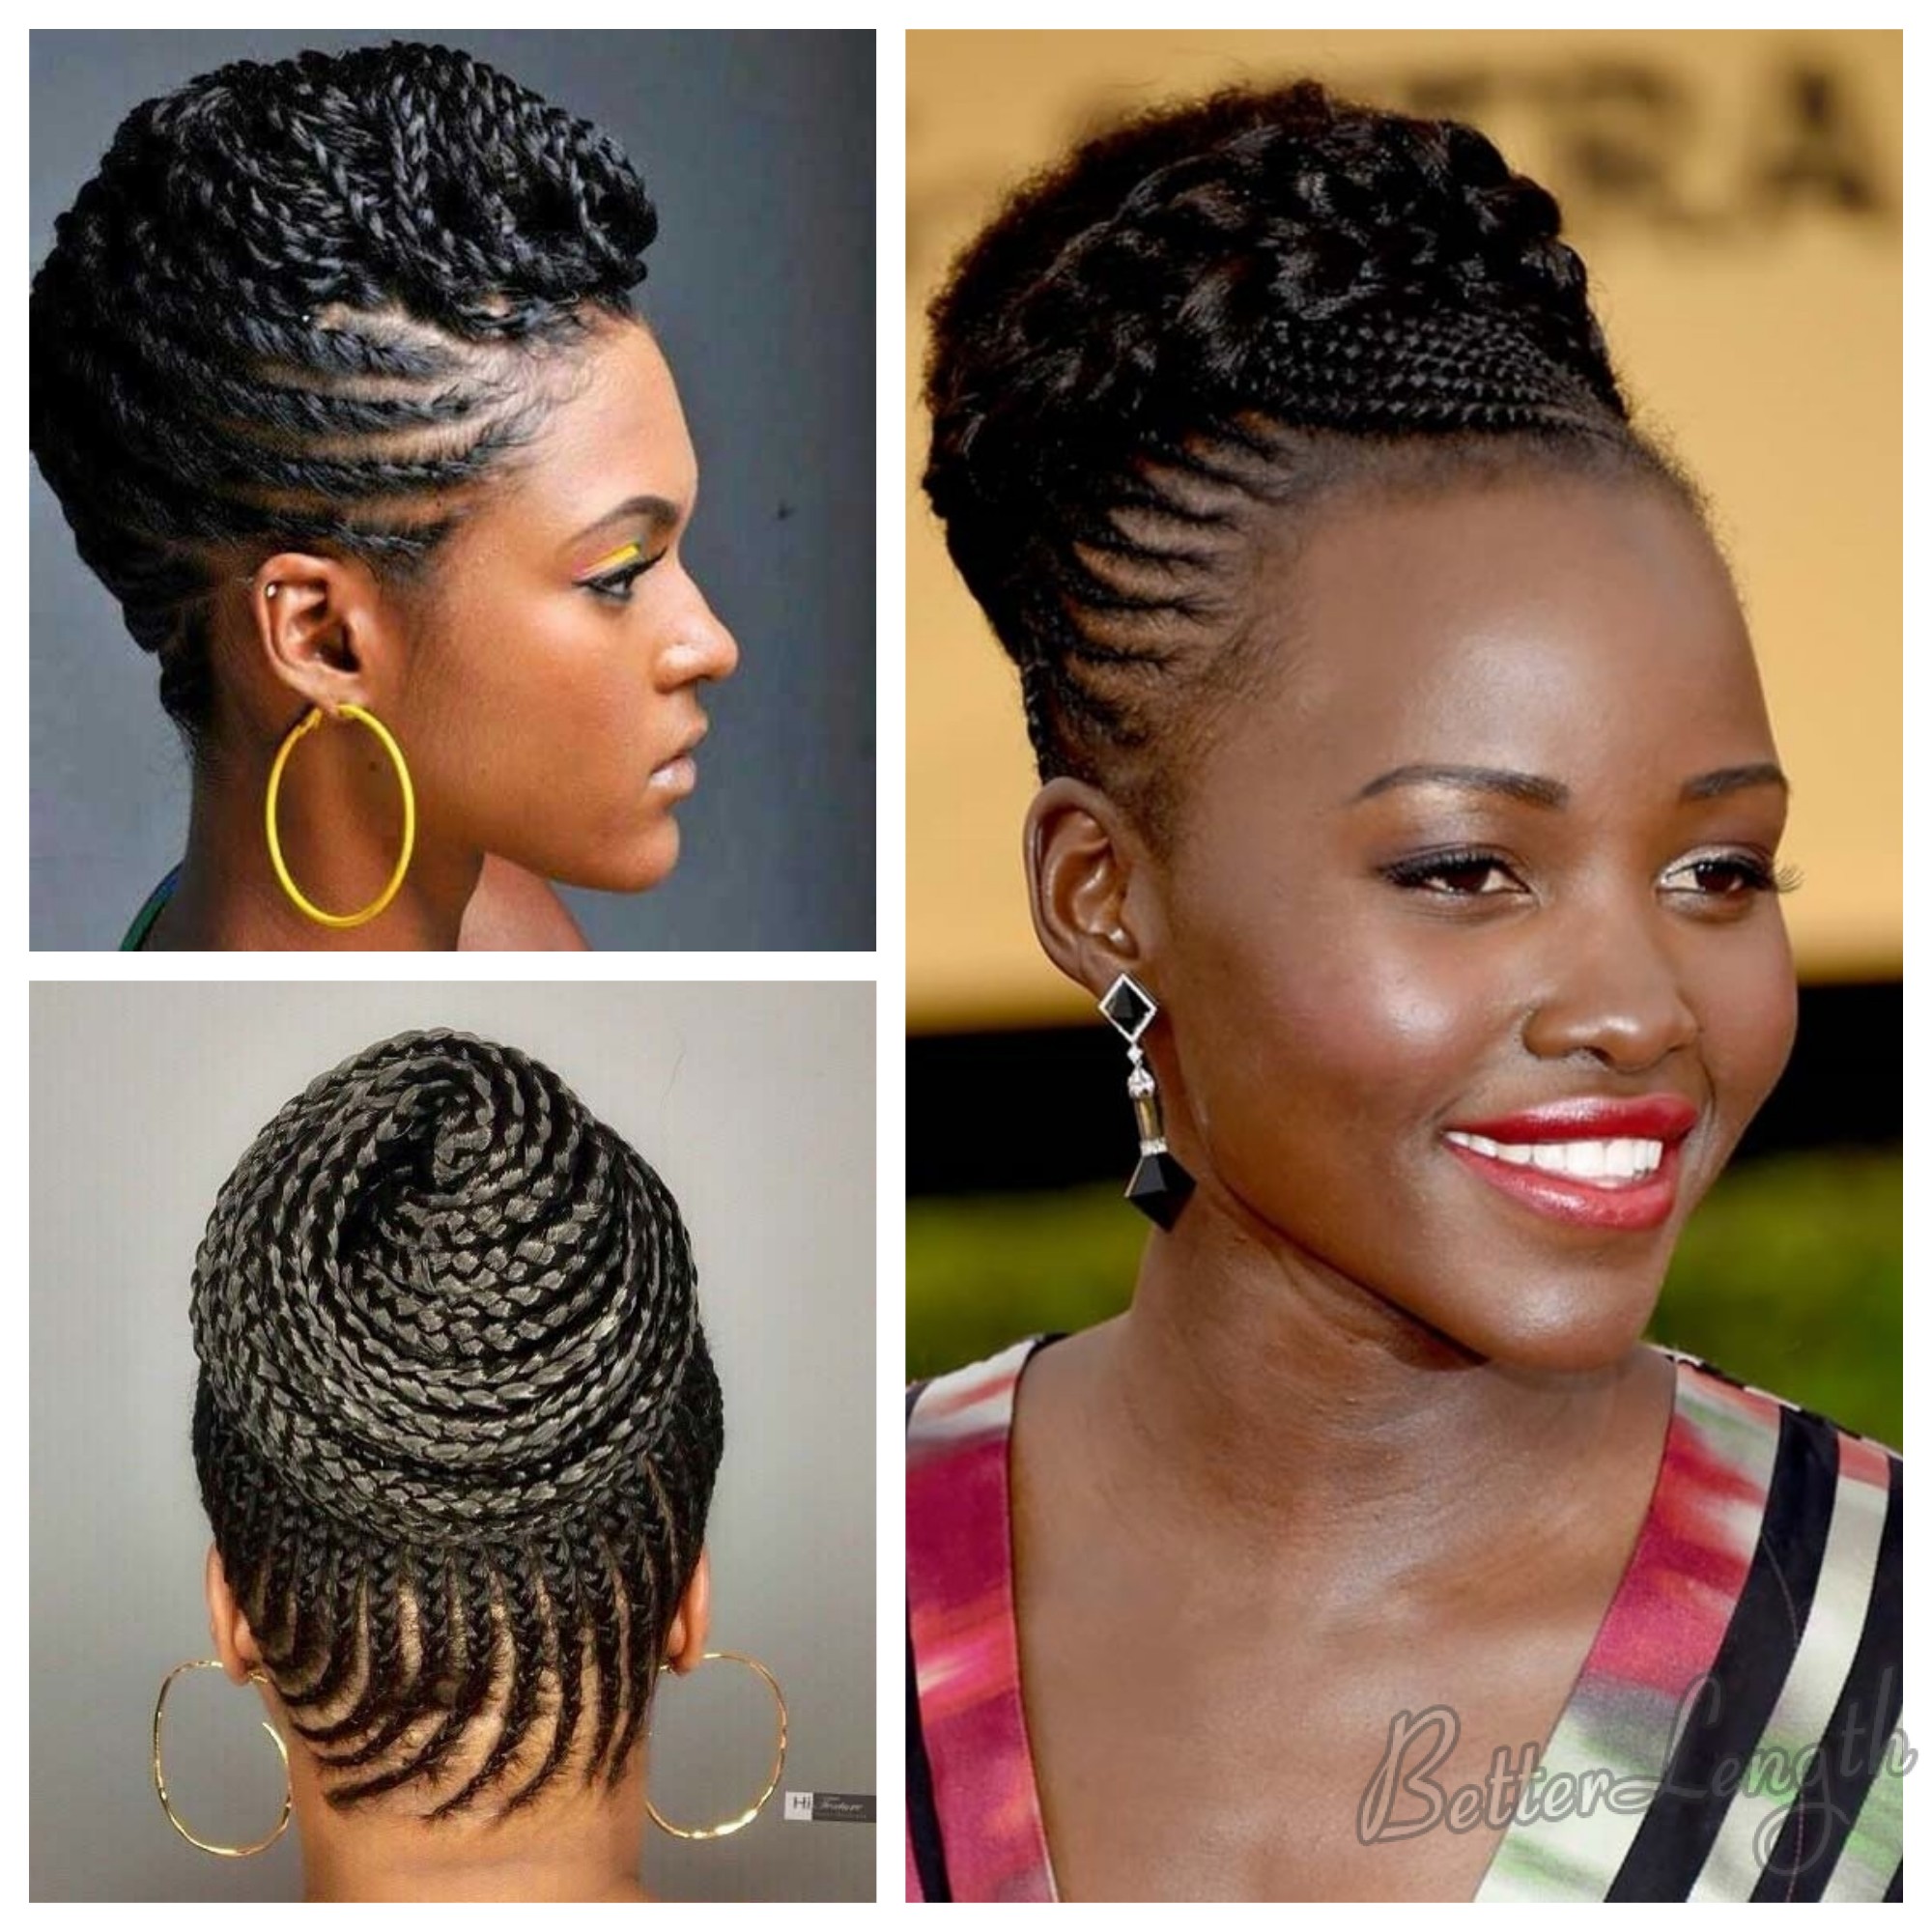 CORNROW STYLE - Dope 2018 Summer Hairstyles for Black Women